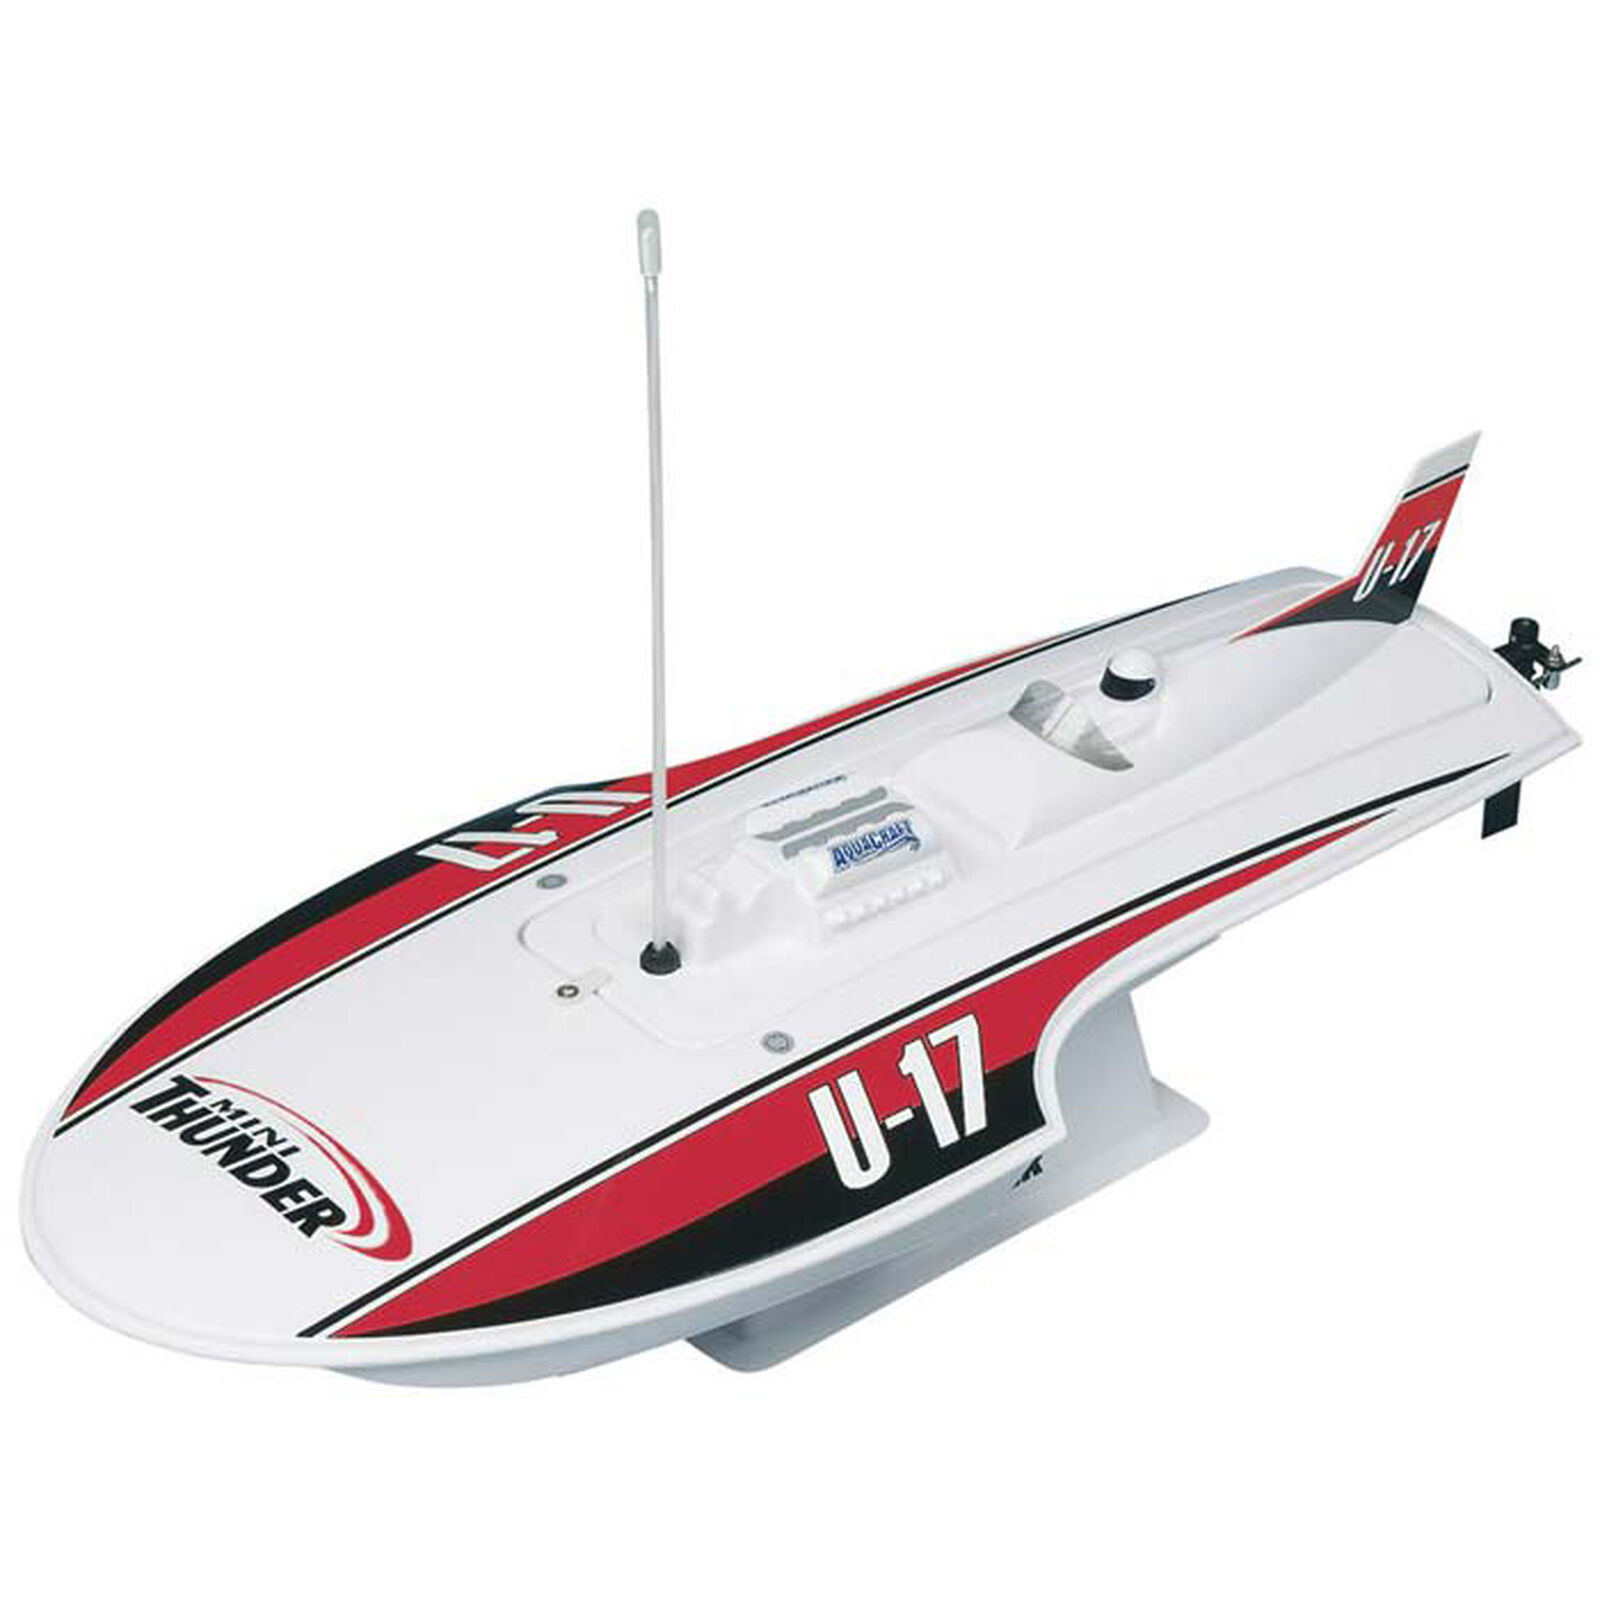 Mini Thunder Round Nose Hydroplane Red A2